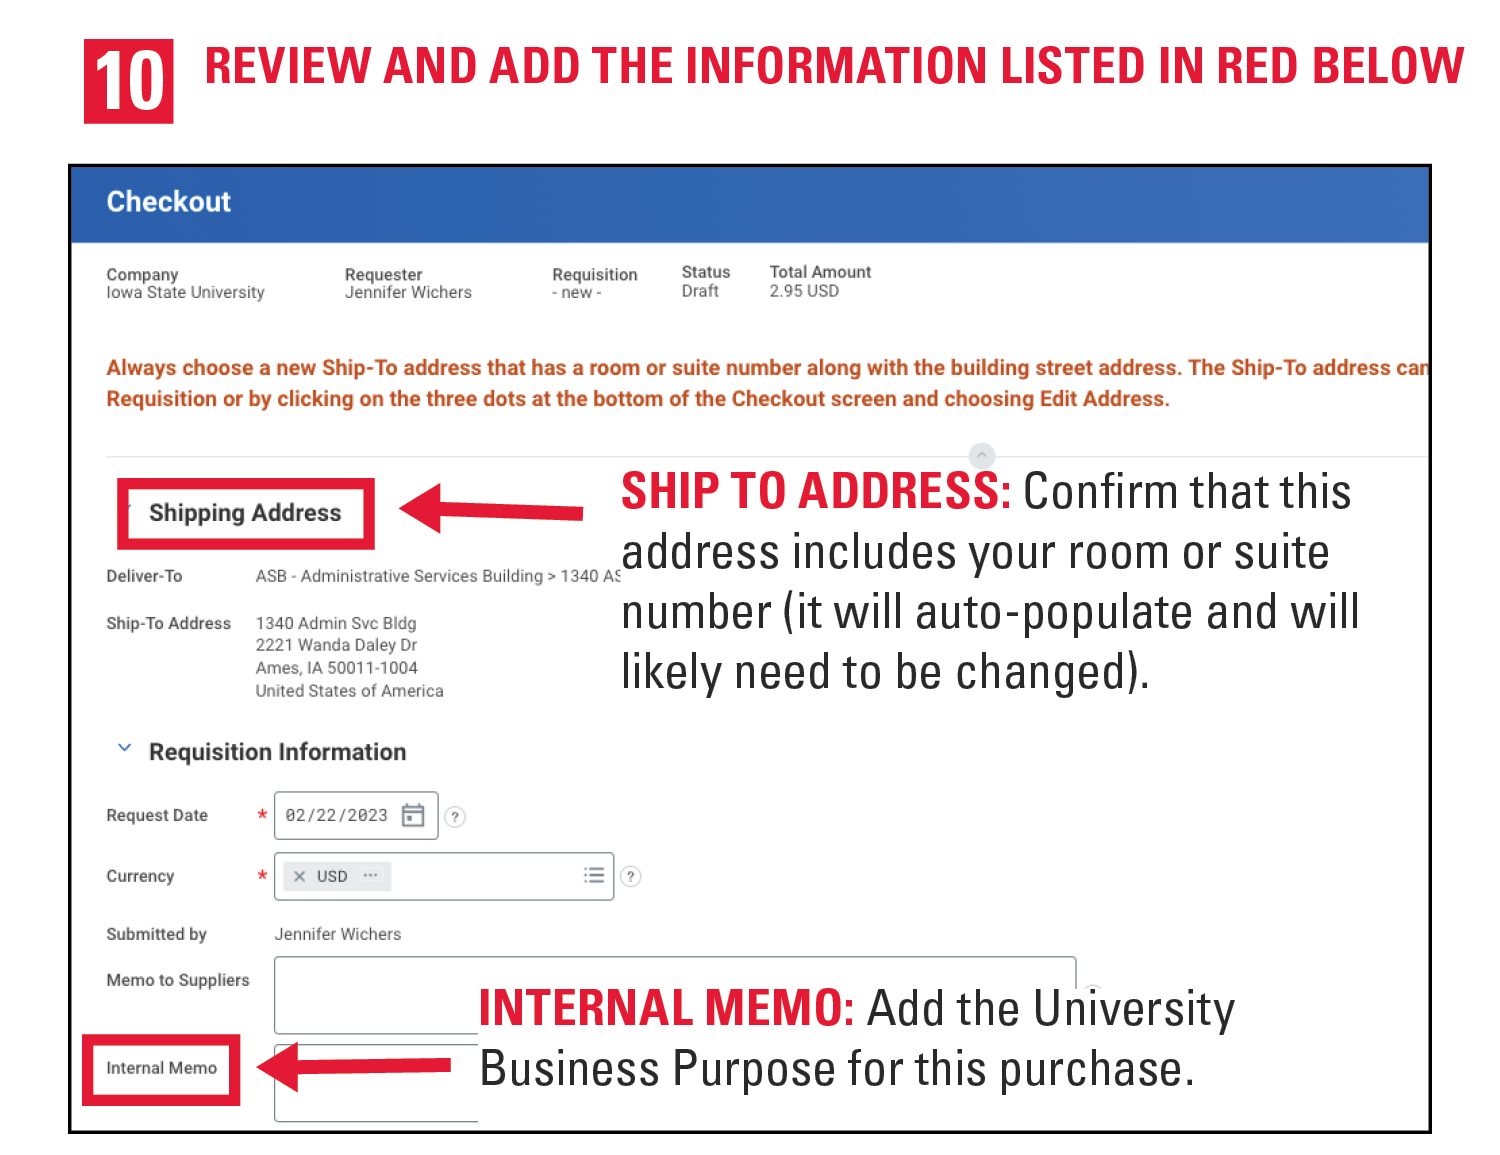 10. Review and add the information listed in red below. Ship to address: Confirm that this address includes your room or suite number (it will auto-populate and will likely need to be changed). Internal Memo: Add the University Business Purpose for this purchase.